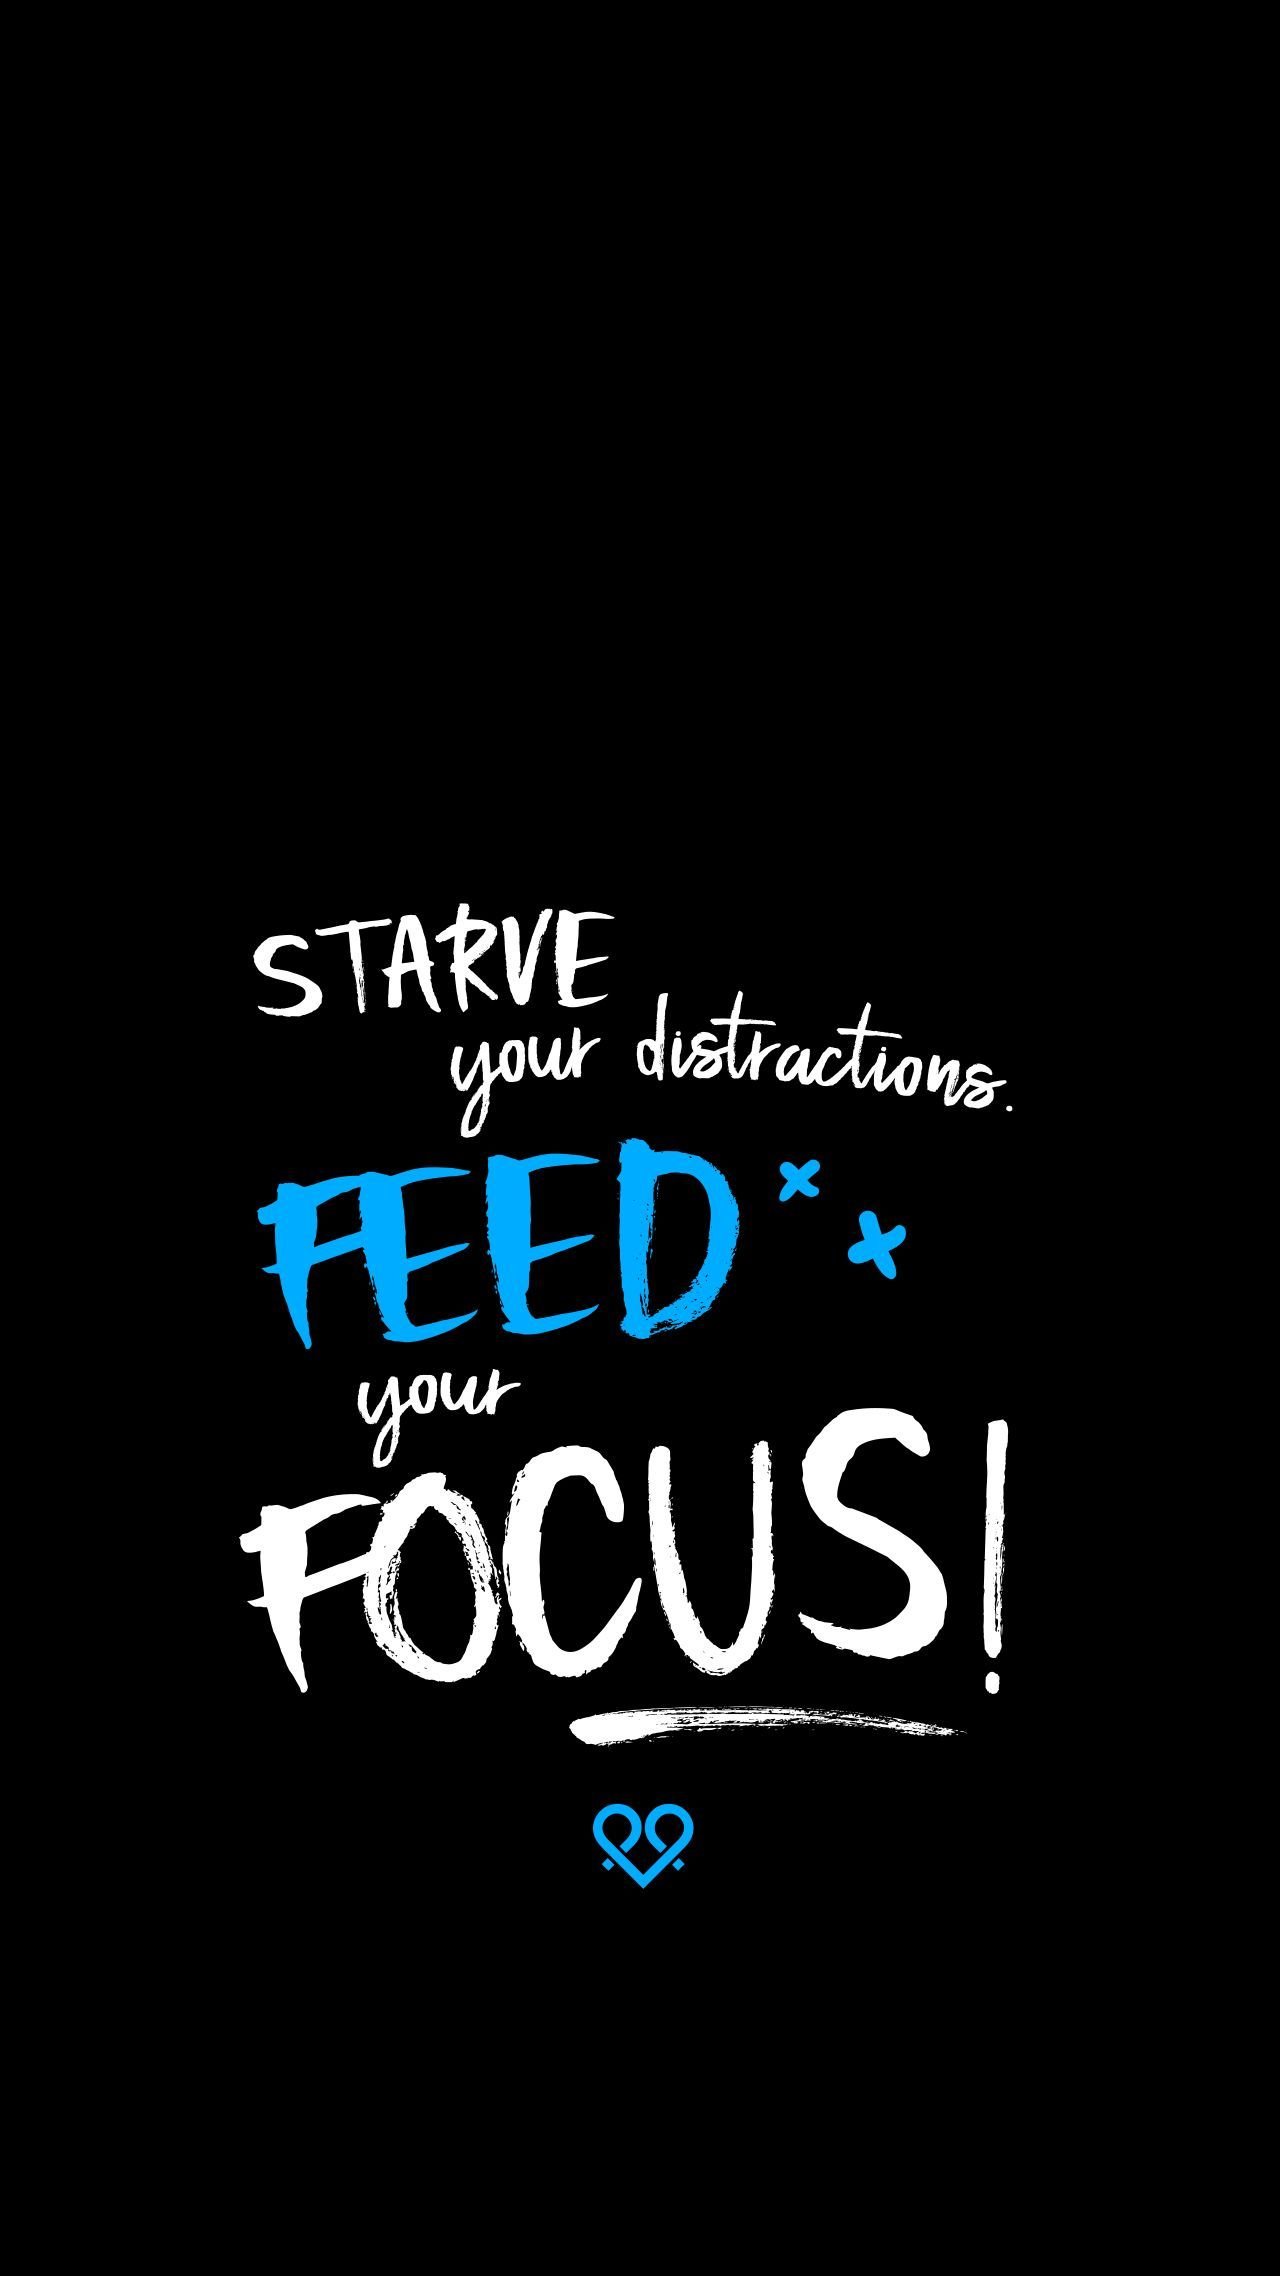 Stay Focused Wallpapers